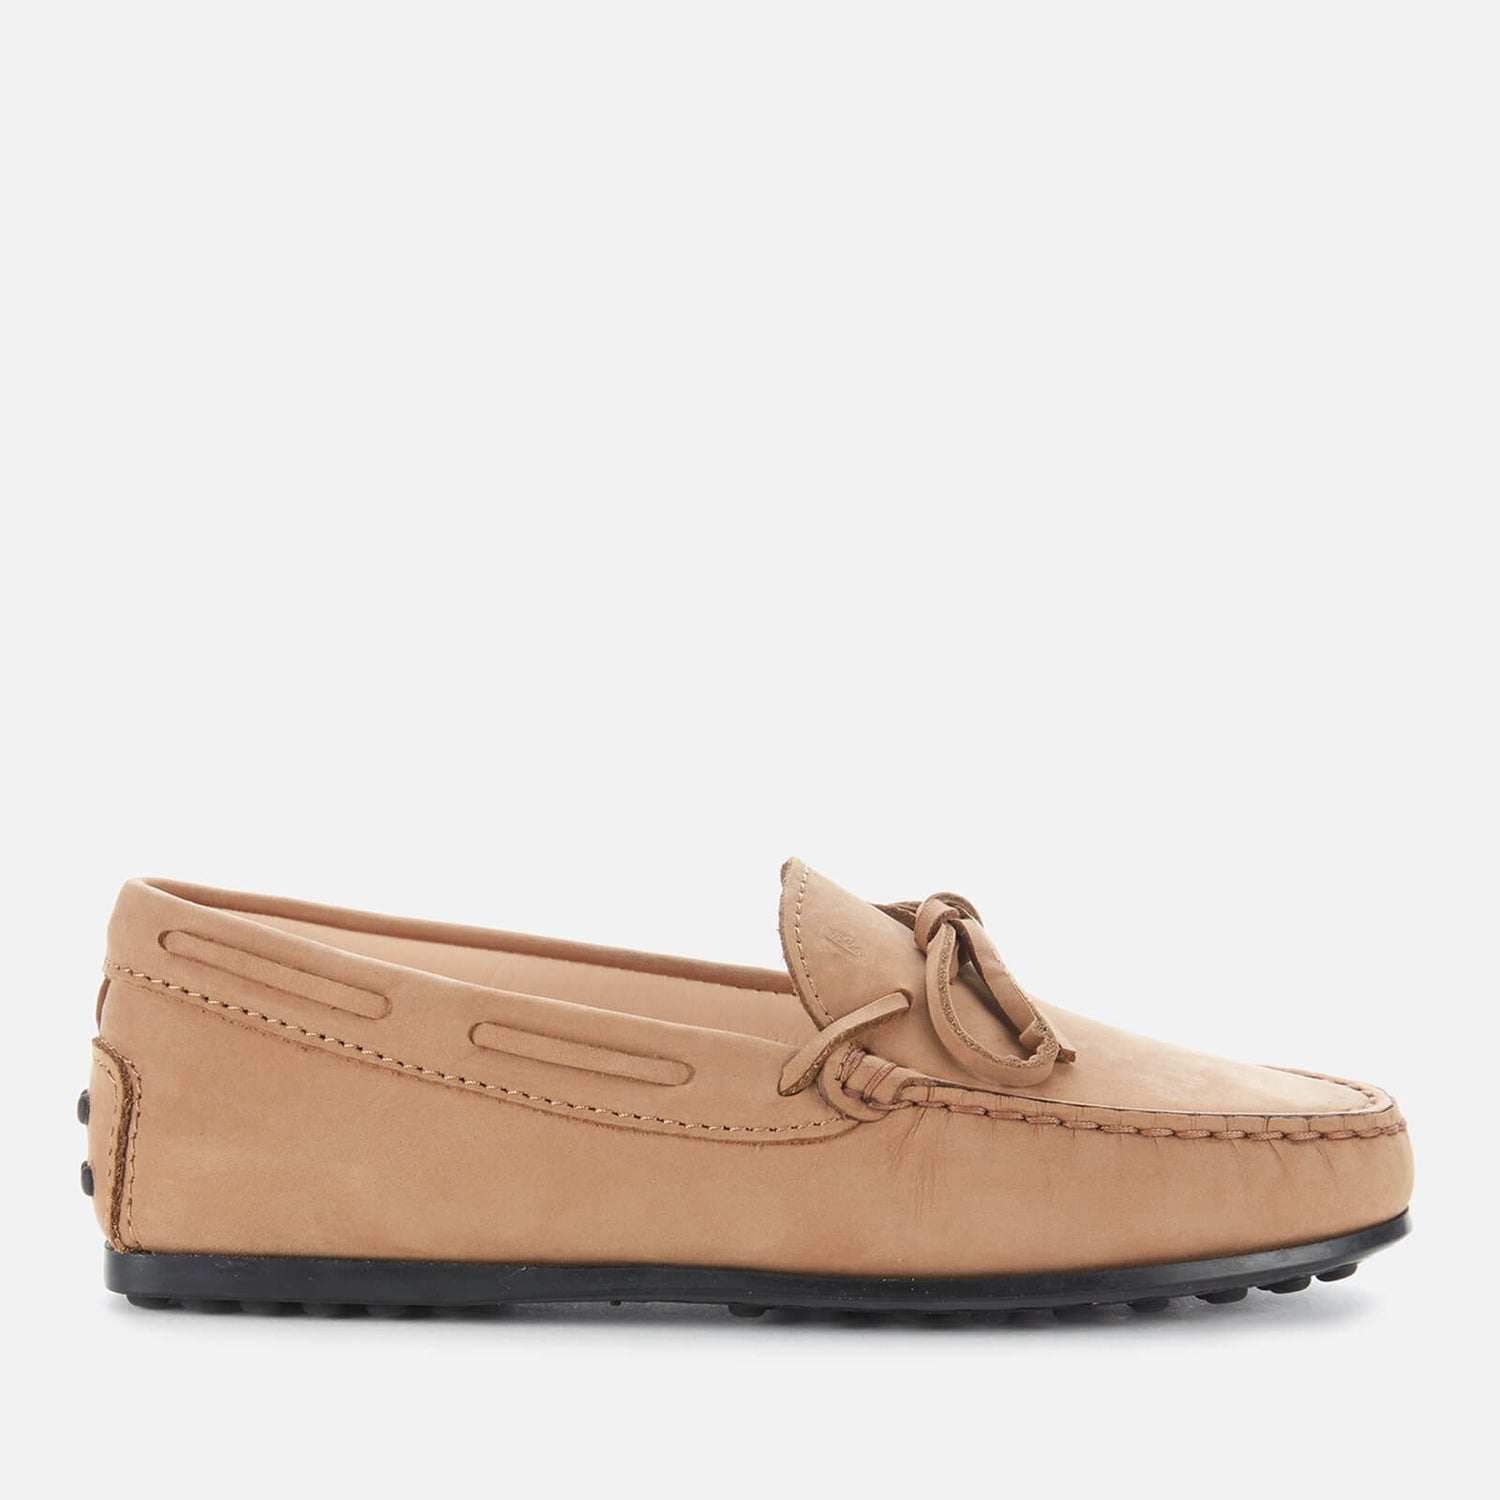 Tods Toddlers' Suede Loafers - Brown - UK 12 Kids